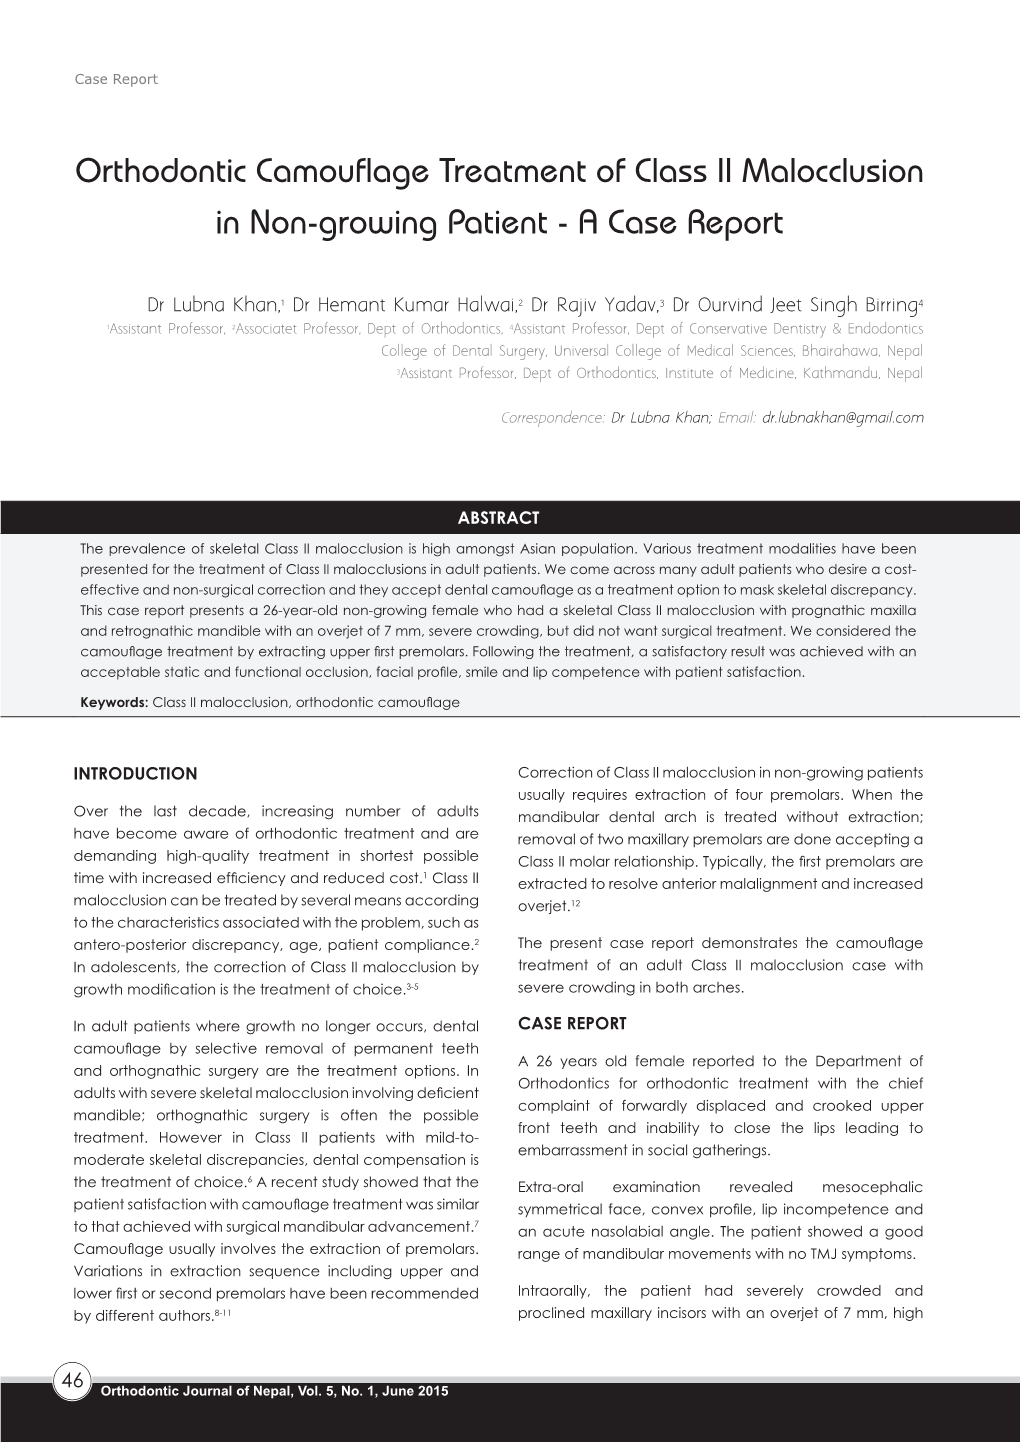 Orthodontic Camouflage Treatment of Class II Malocclusion in Non-Growing Patient - a Case Report